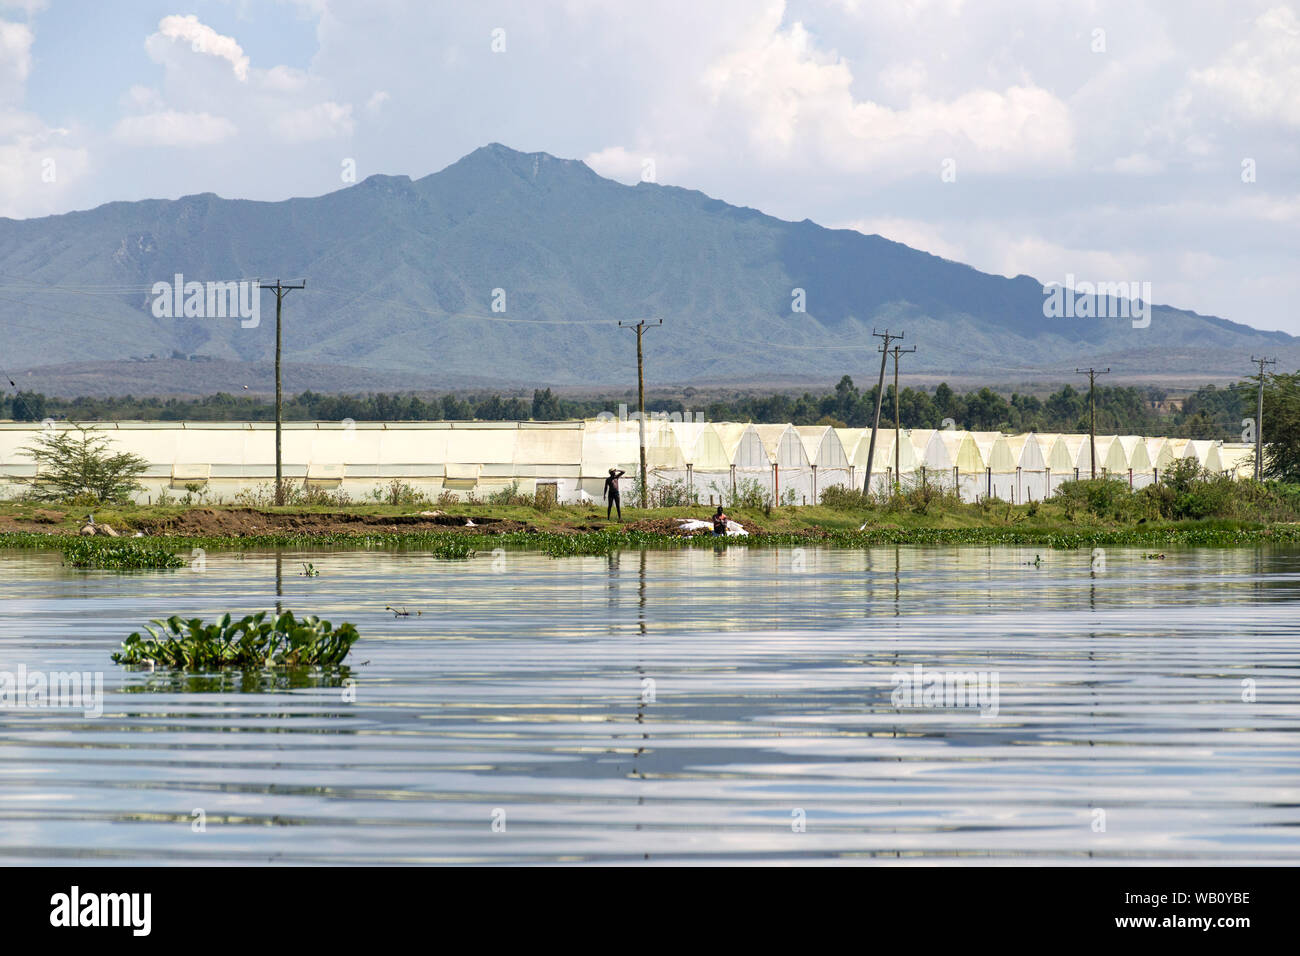 Locals by flower farm canopies without covers by lake Naivasha with mount Longonot in background, Kenya Stock Photo